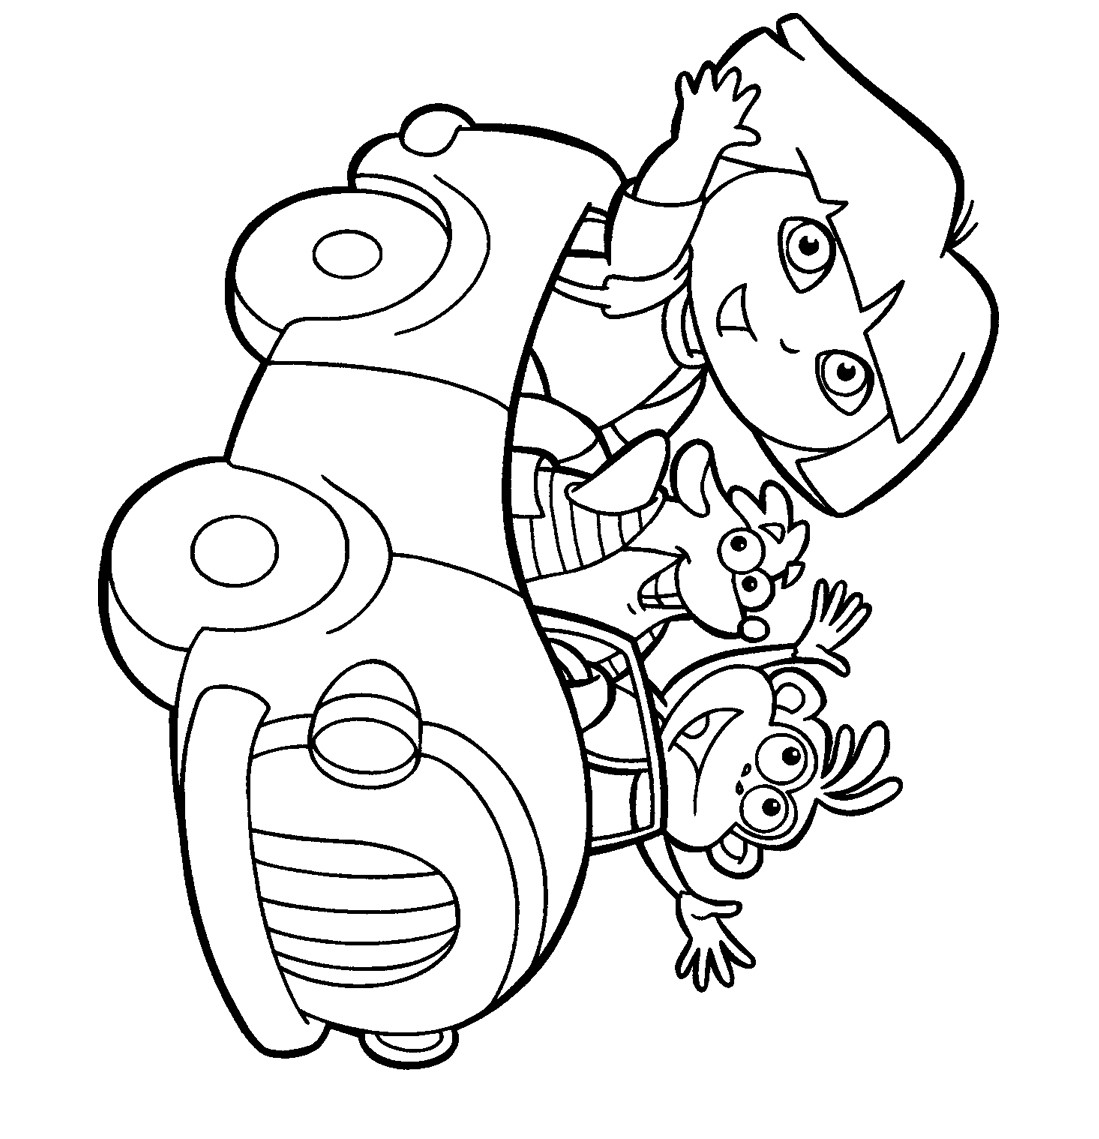 Kids Coloring Page
 Printable coloring pages for kids